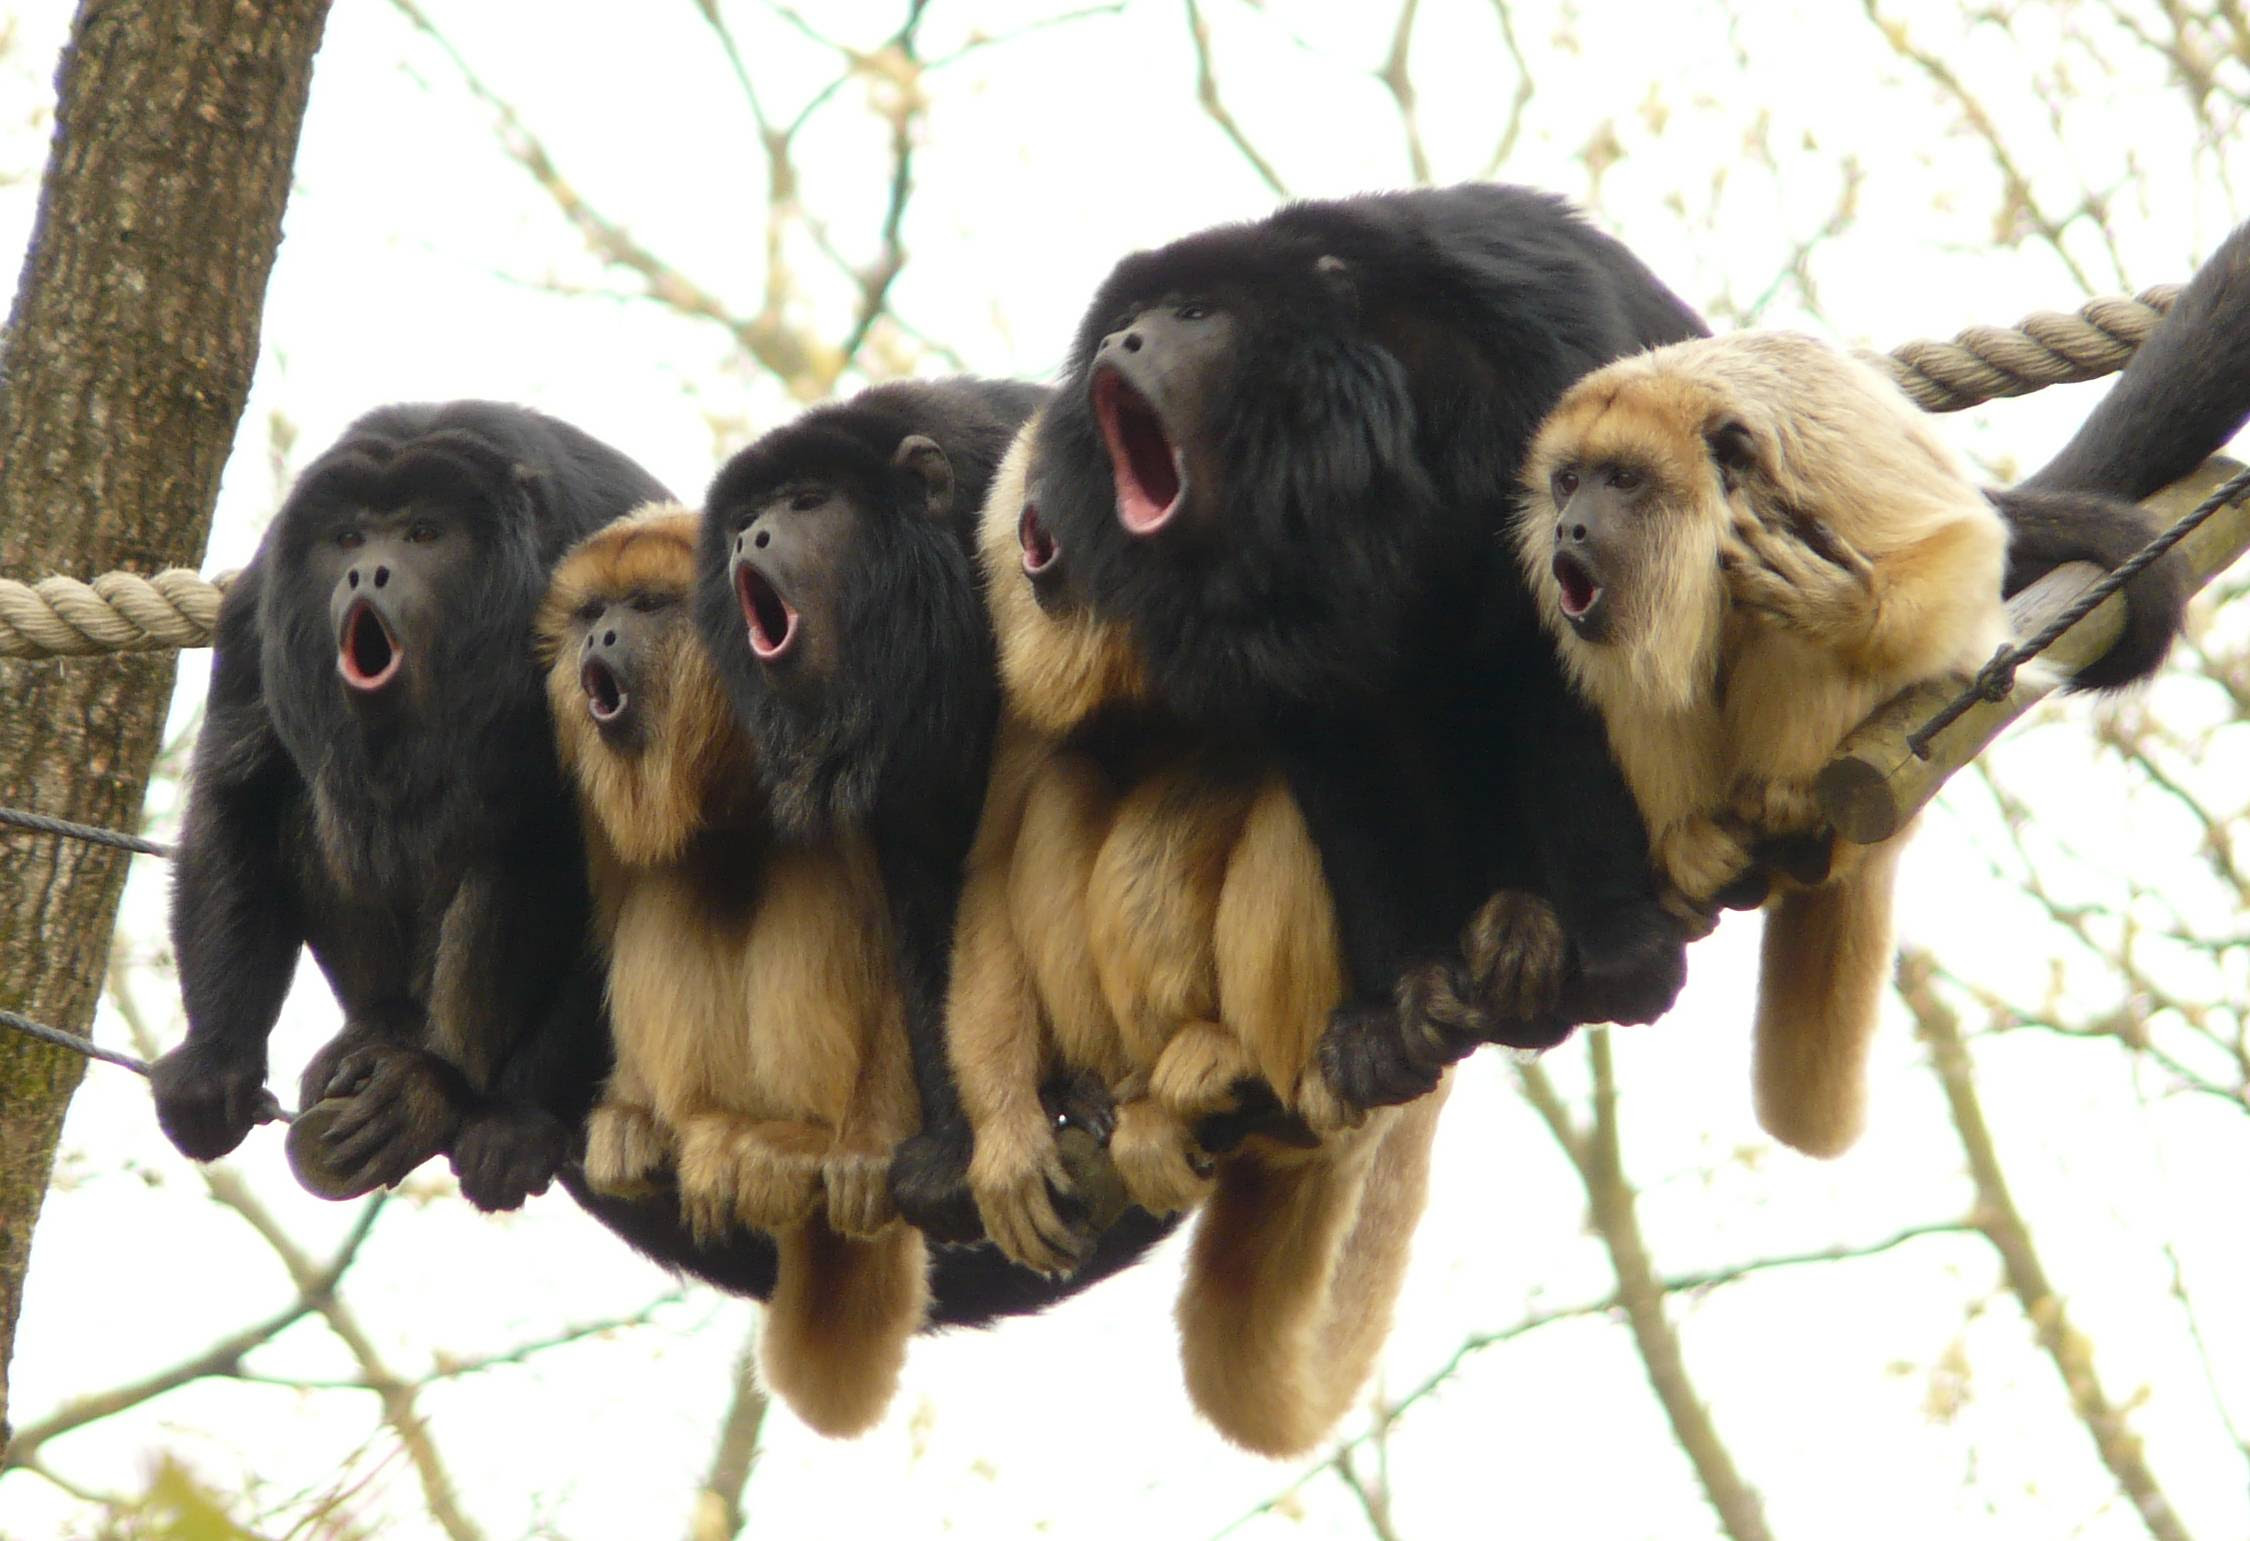 http://www.duskyswondersite.com/wp-content/uploads/2016/04/animals-group-of-Gibbons-are-singing-together.-via-george.jpg